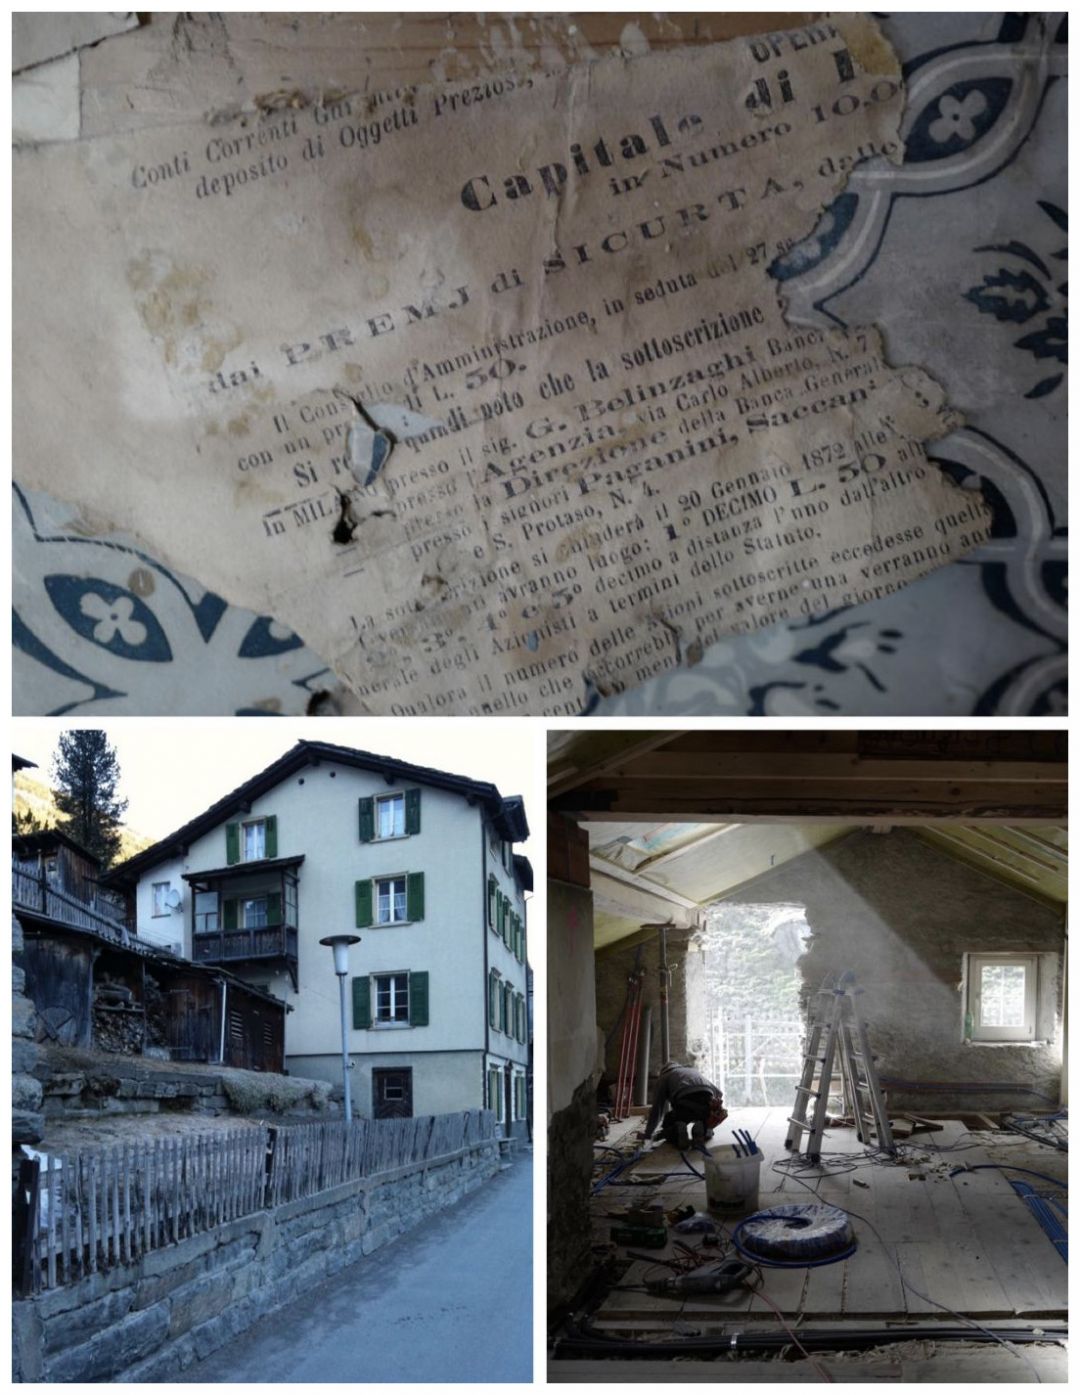 Brücke 49 Vals | History | Concept | Restoration Hotels - The Collection of ruins to fabulous | The Aficionados Journal 